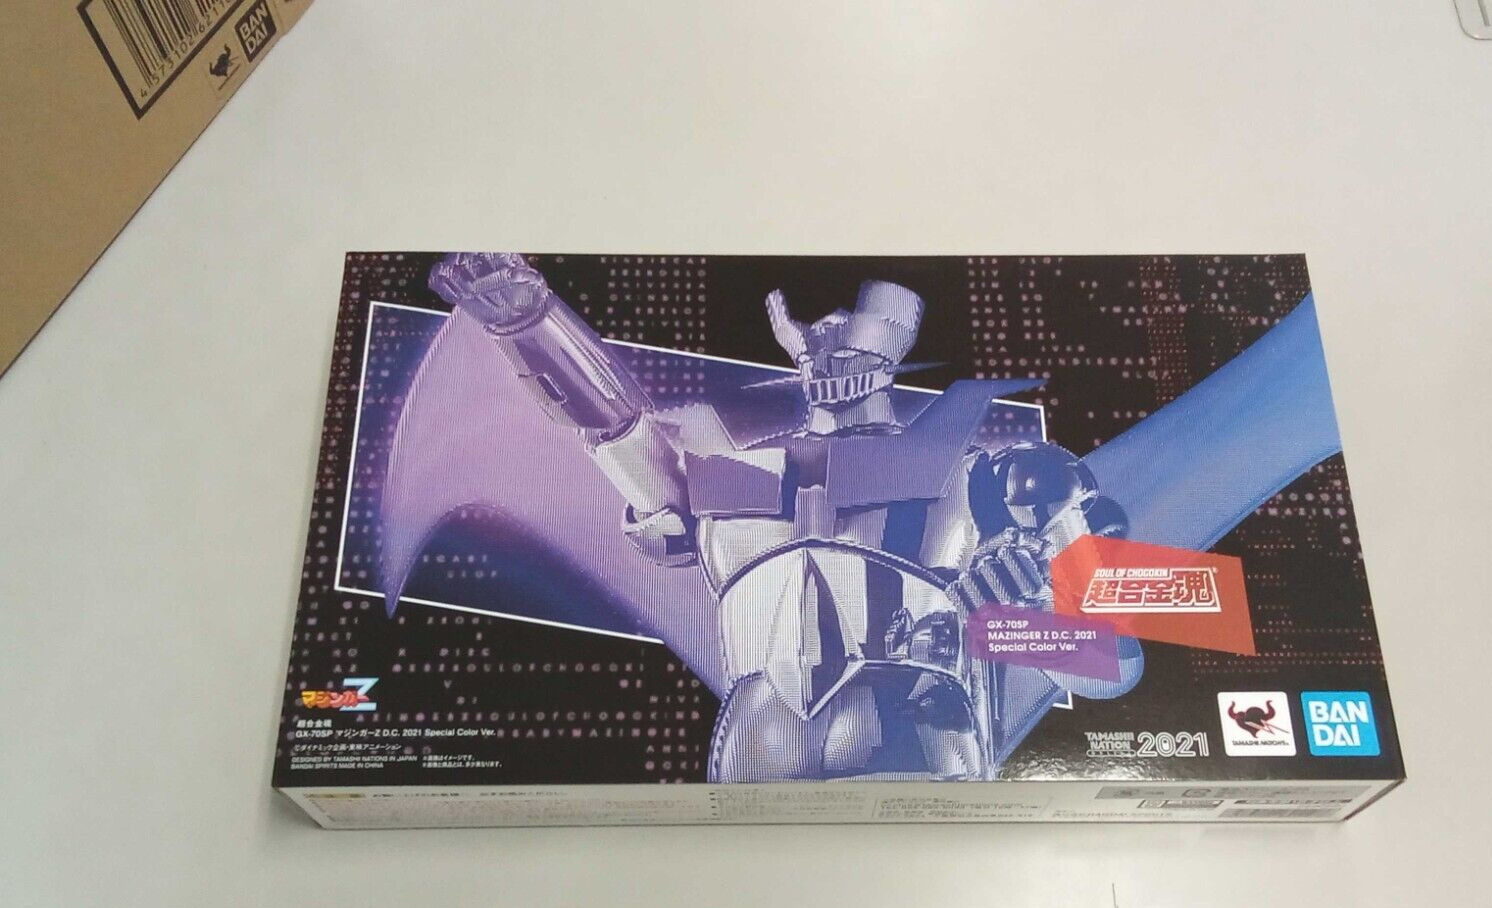 BANDAI Superalloy Mazinger Z GX-70SP 2021 figure Special color Soul of Chogokin